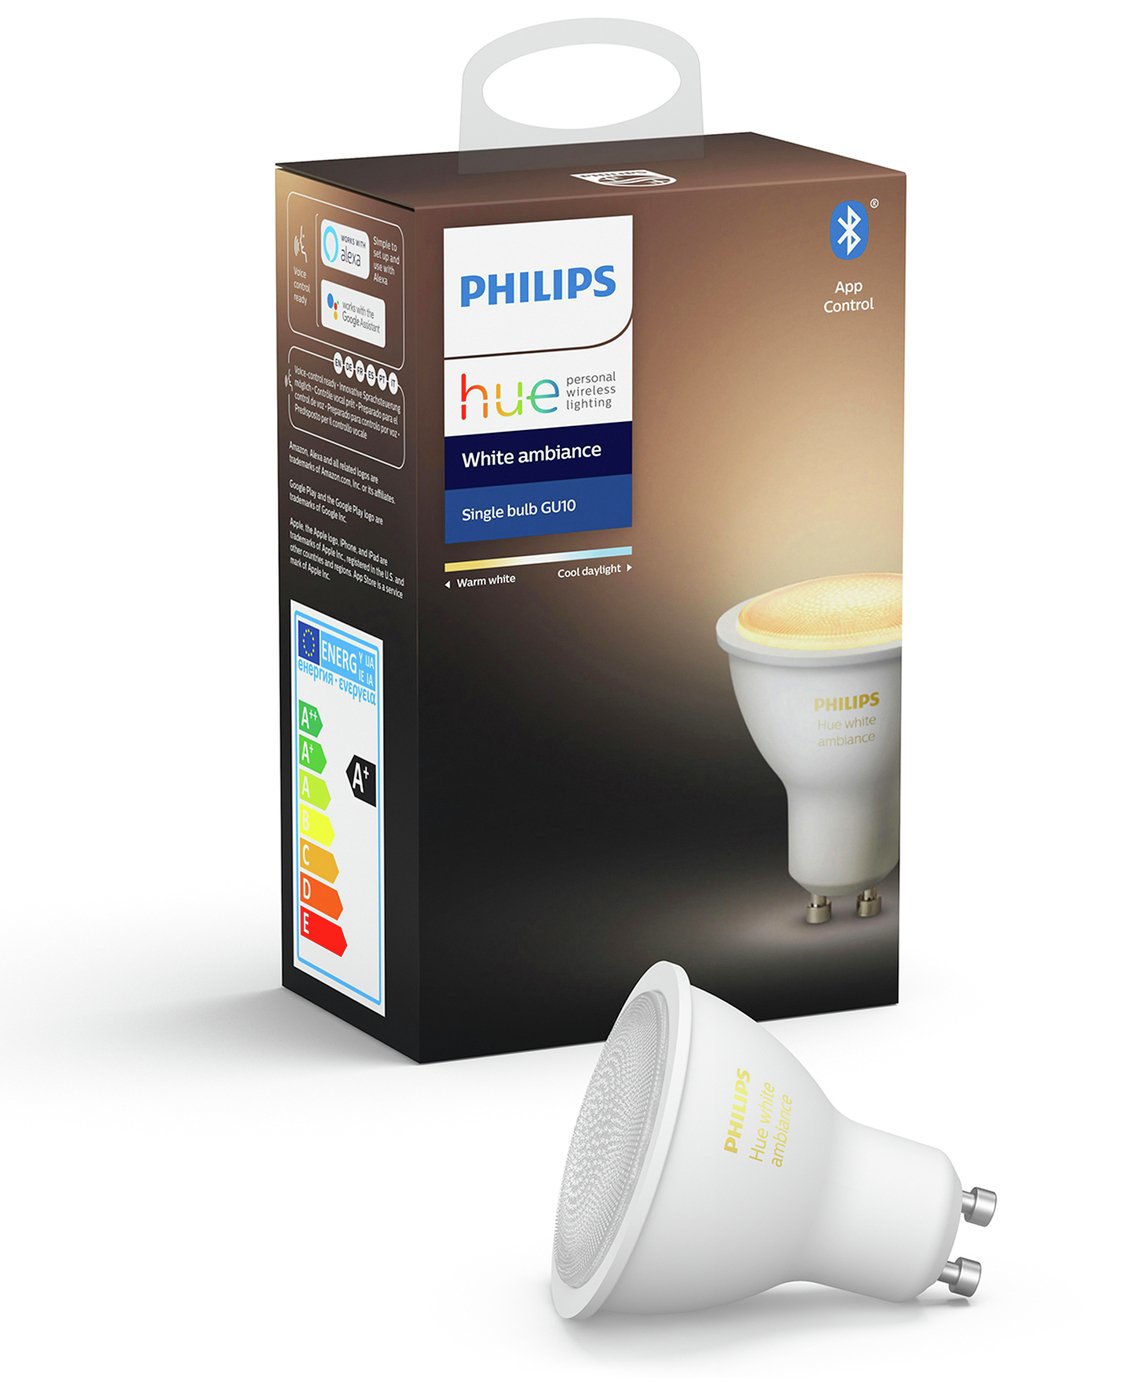 Philips Hue GU10 White Ambiance Smart Bulb with Bluetooth Review